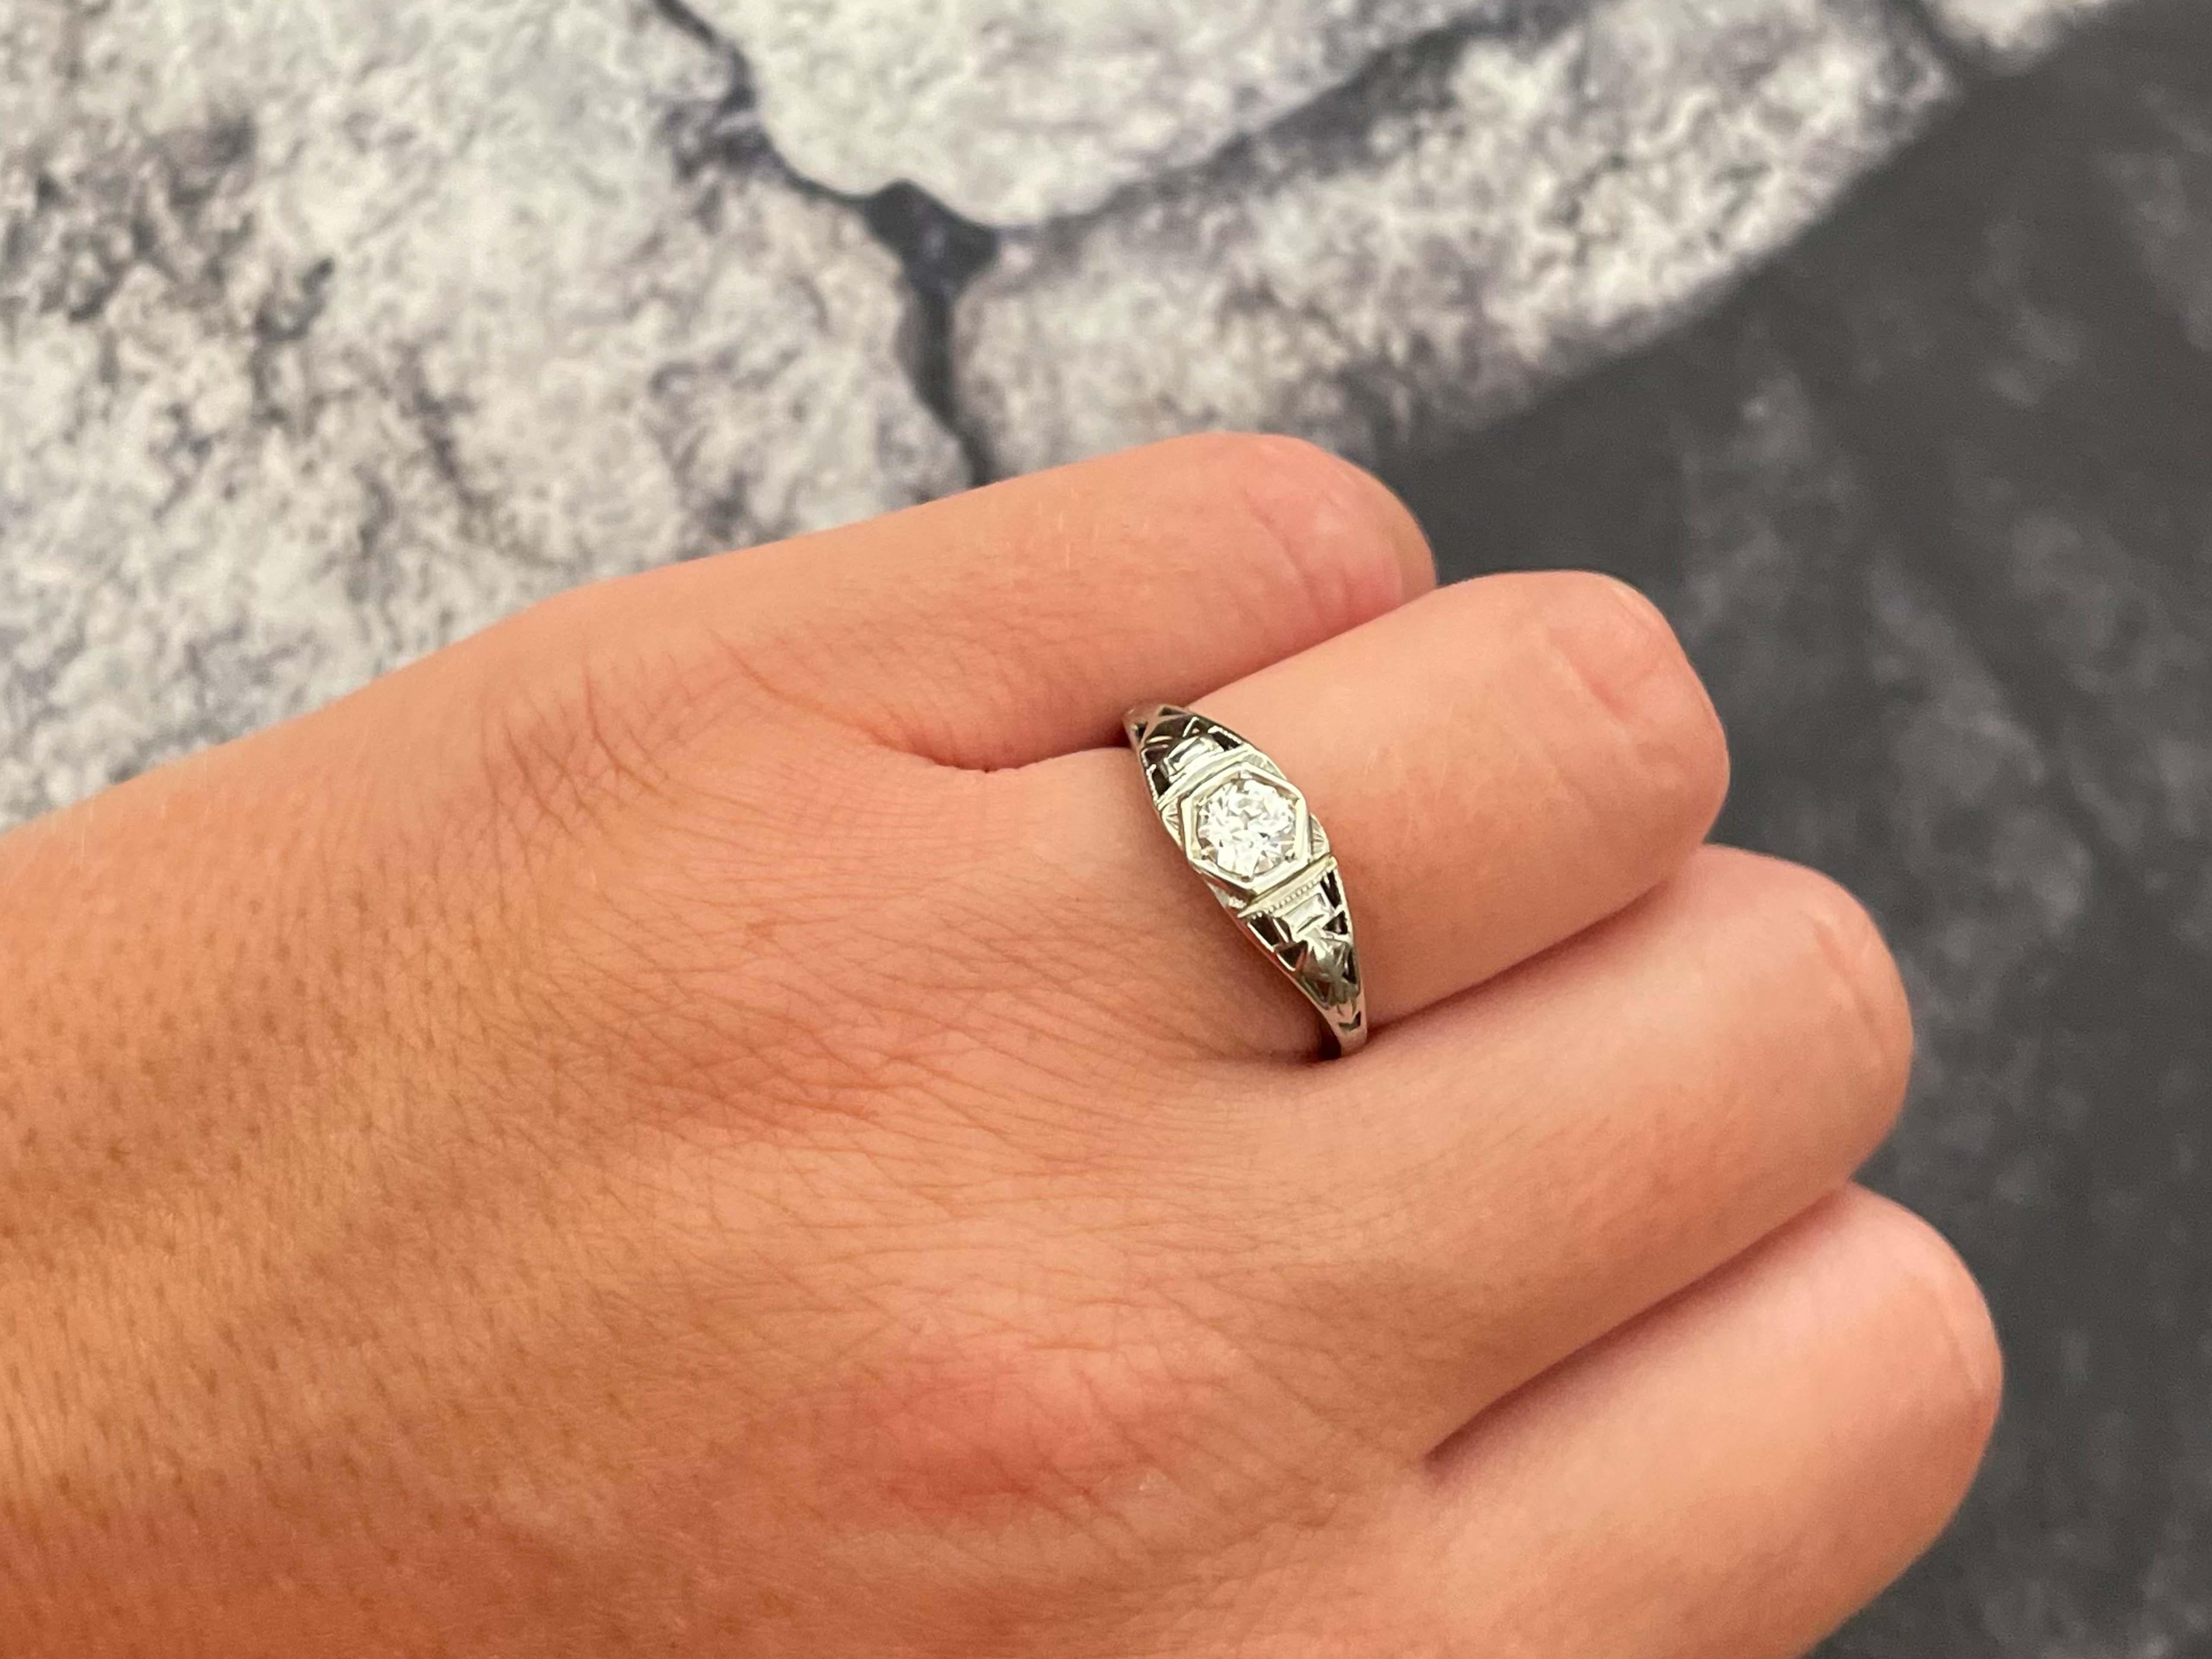 Item Specifications:

Metal: 18k White Gold

Style: Statement Ring

Ring Size: 6.25 (resizing available for a fee)

Total Weight: 2.1 Grams

Diamond Count: 1 old European cut 

Diamond Carat Weight: 0.33
​

Diamond Clarity: VS2
​

Diamond Color: